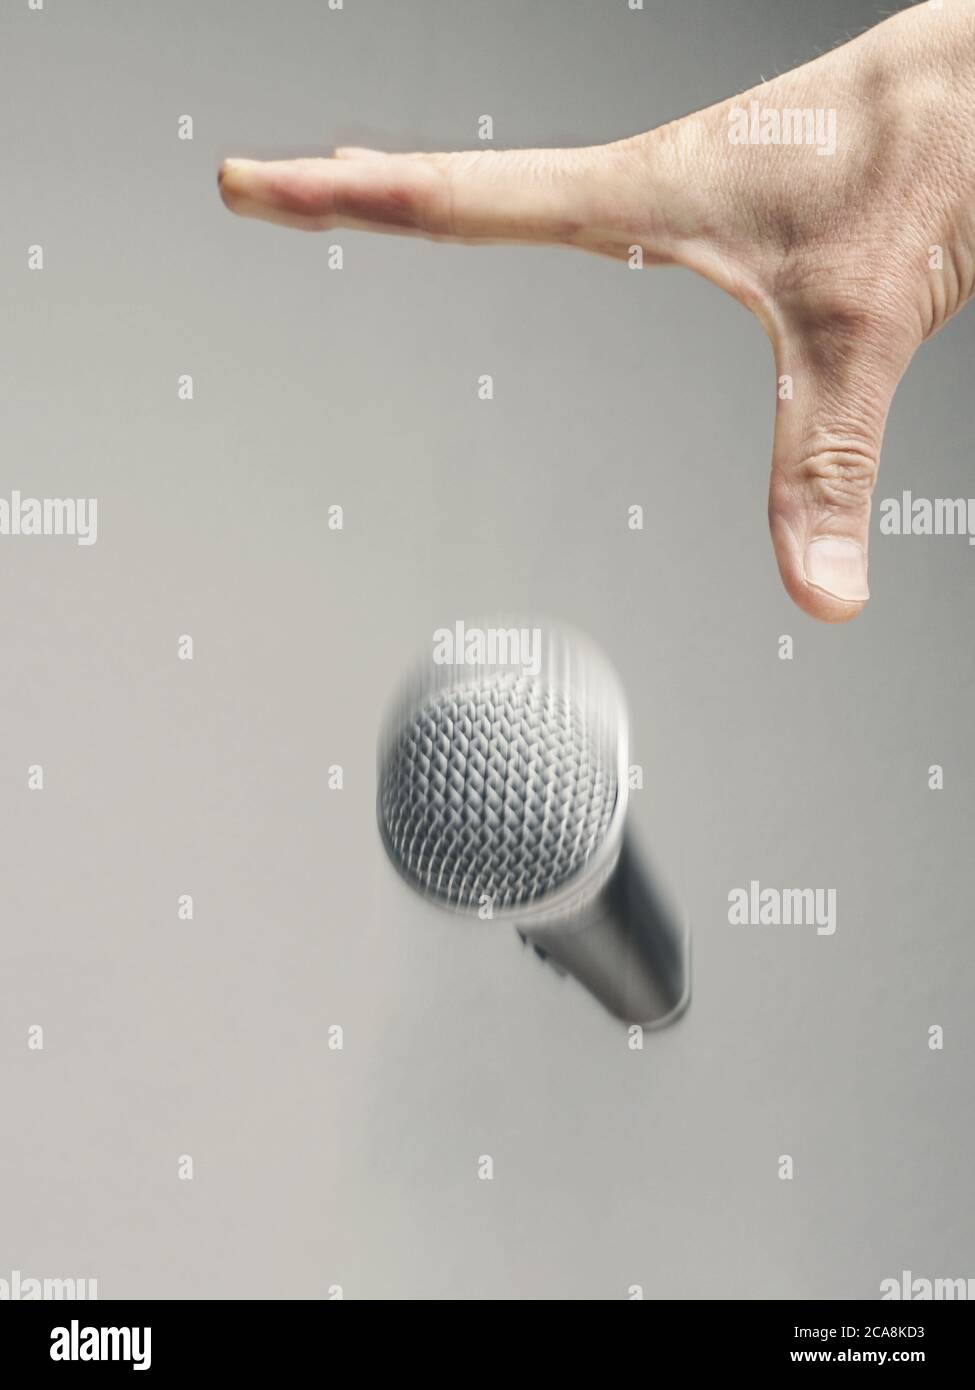 Mic Drop High Resolution Stock Photography and Images - Alamy